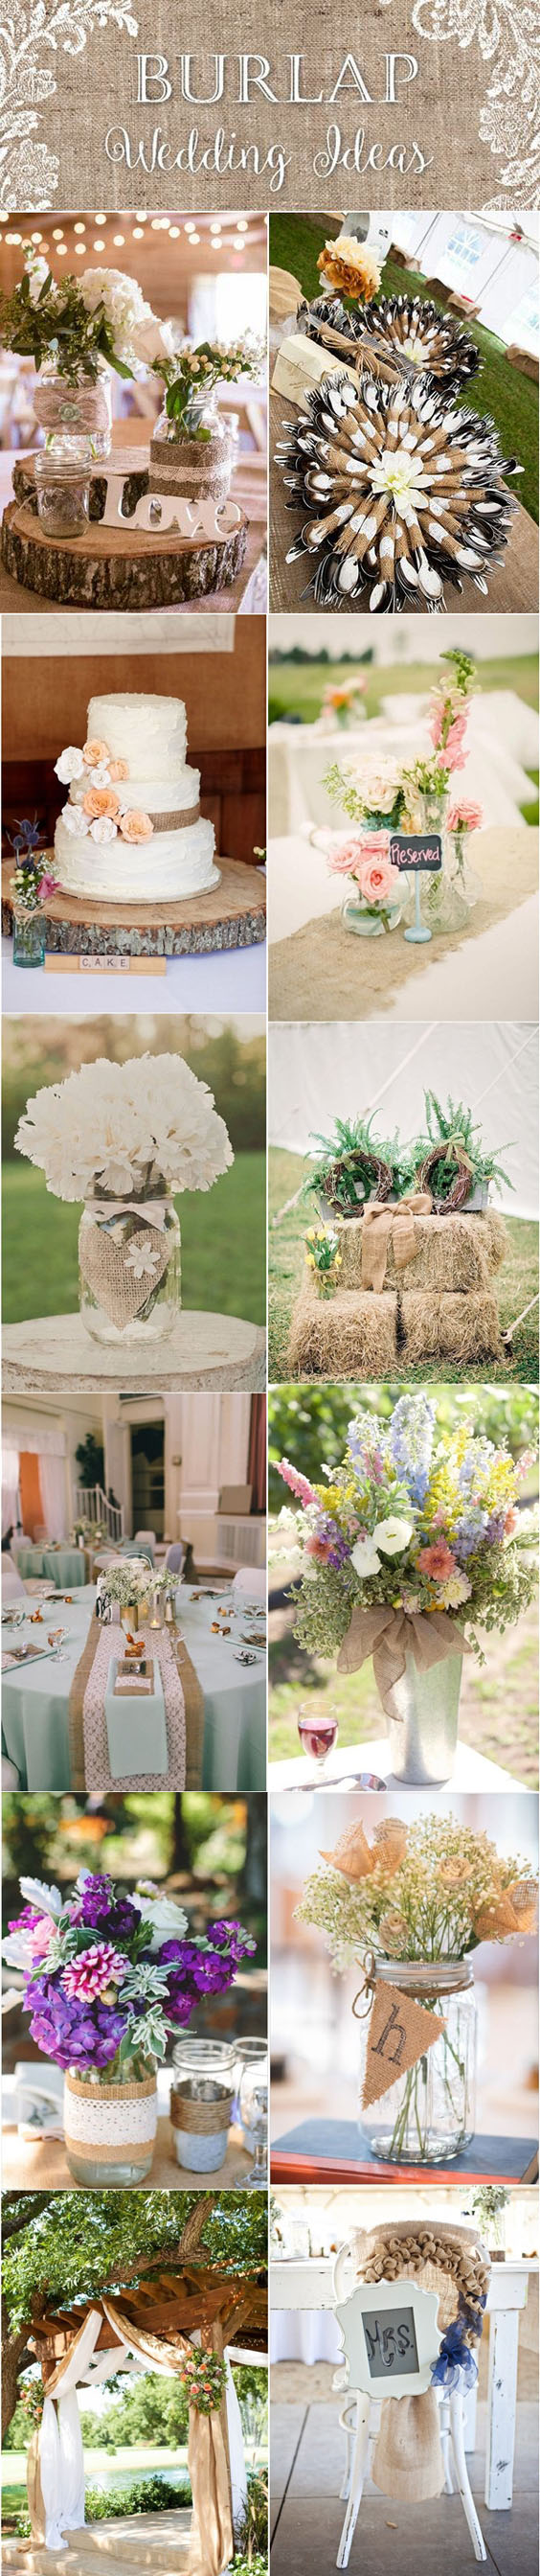 Rustic country burlap and lace wedding ideas